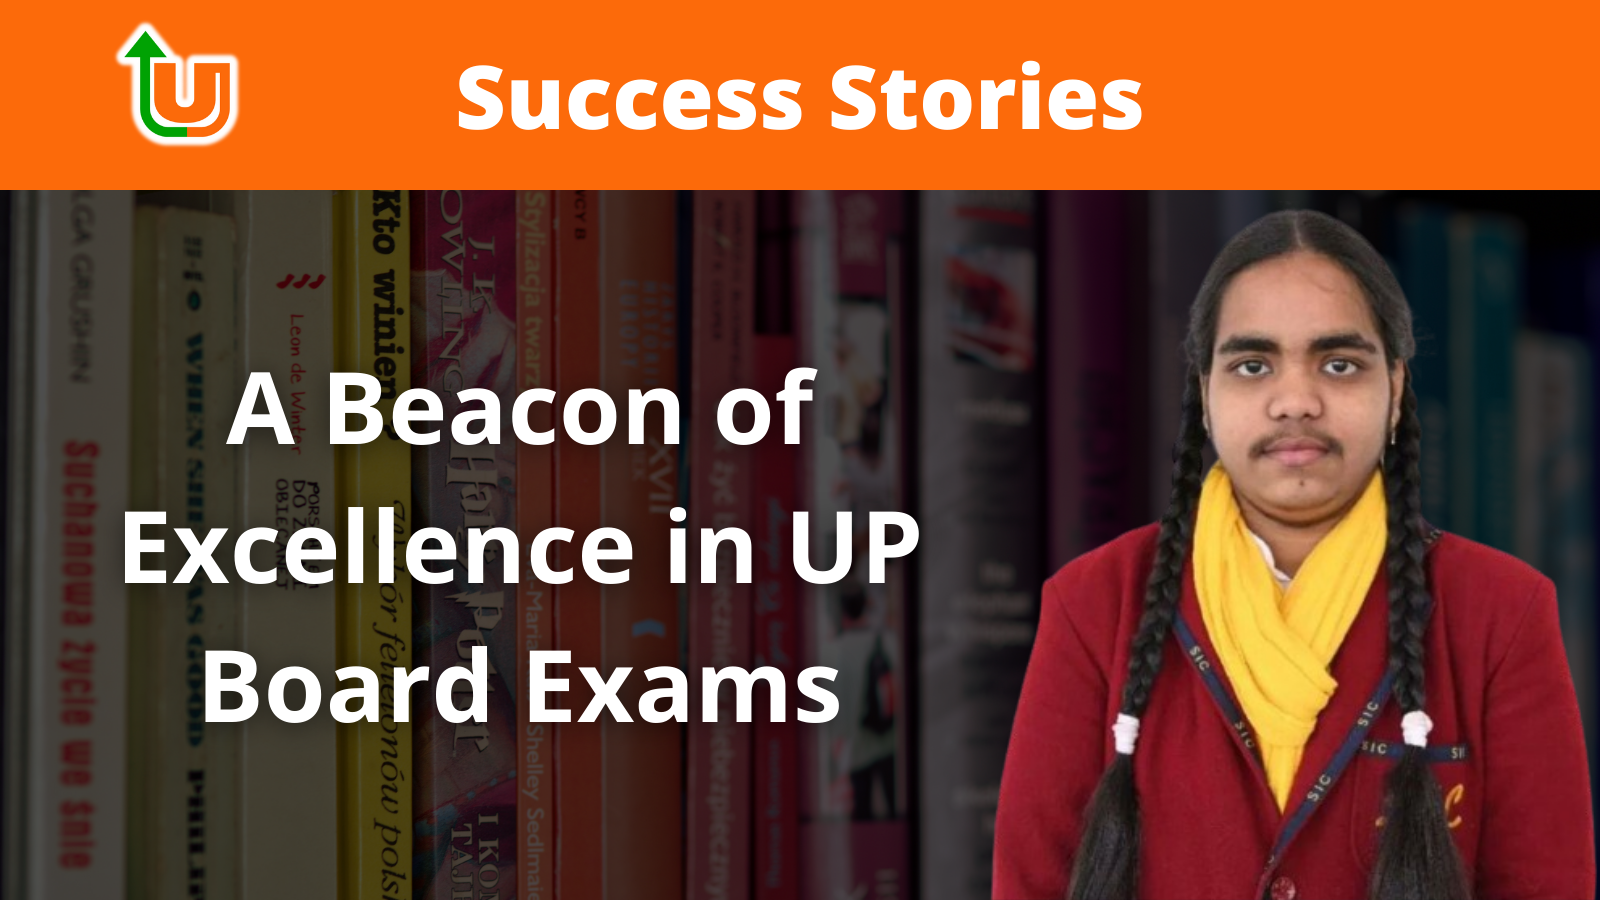 Prachi Nigam: A Beacon of Excellence in UP Board Exams